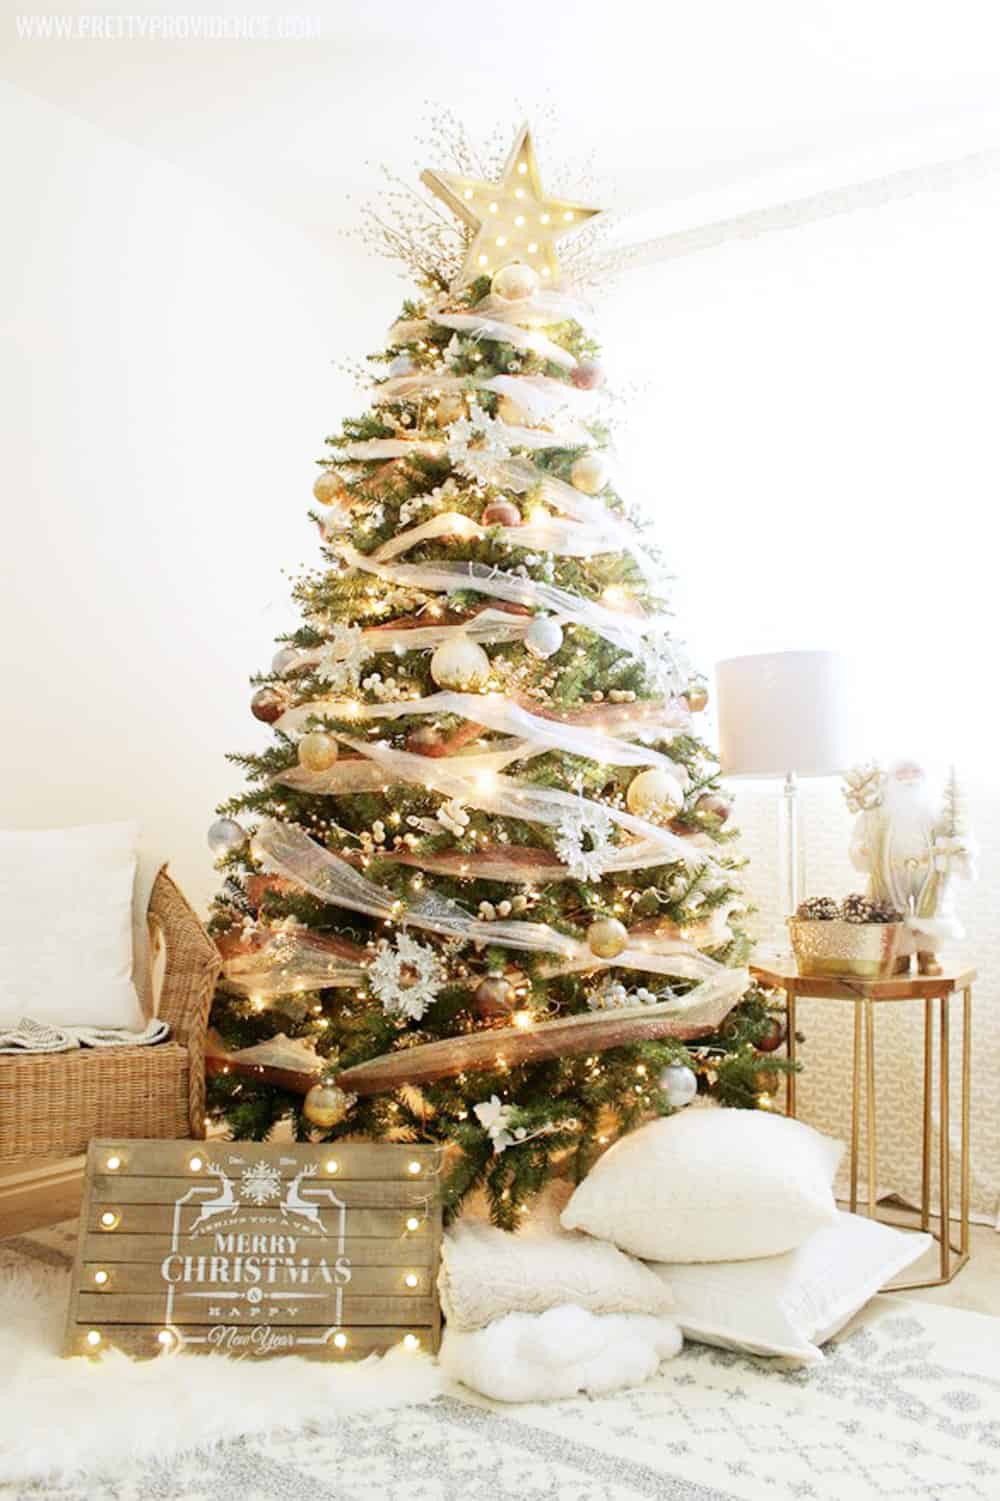 dream christmas tree decorated using bronze, silver, and gold surrounded by pillows and decor